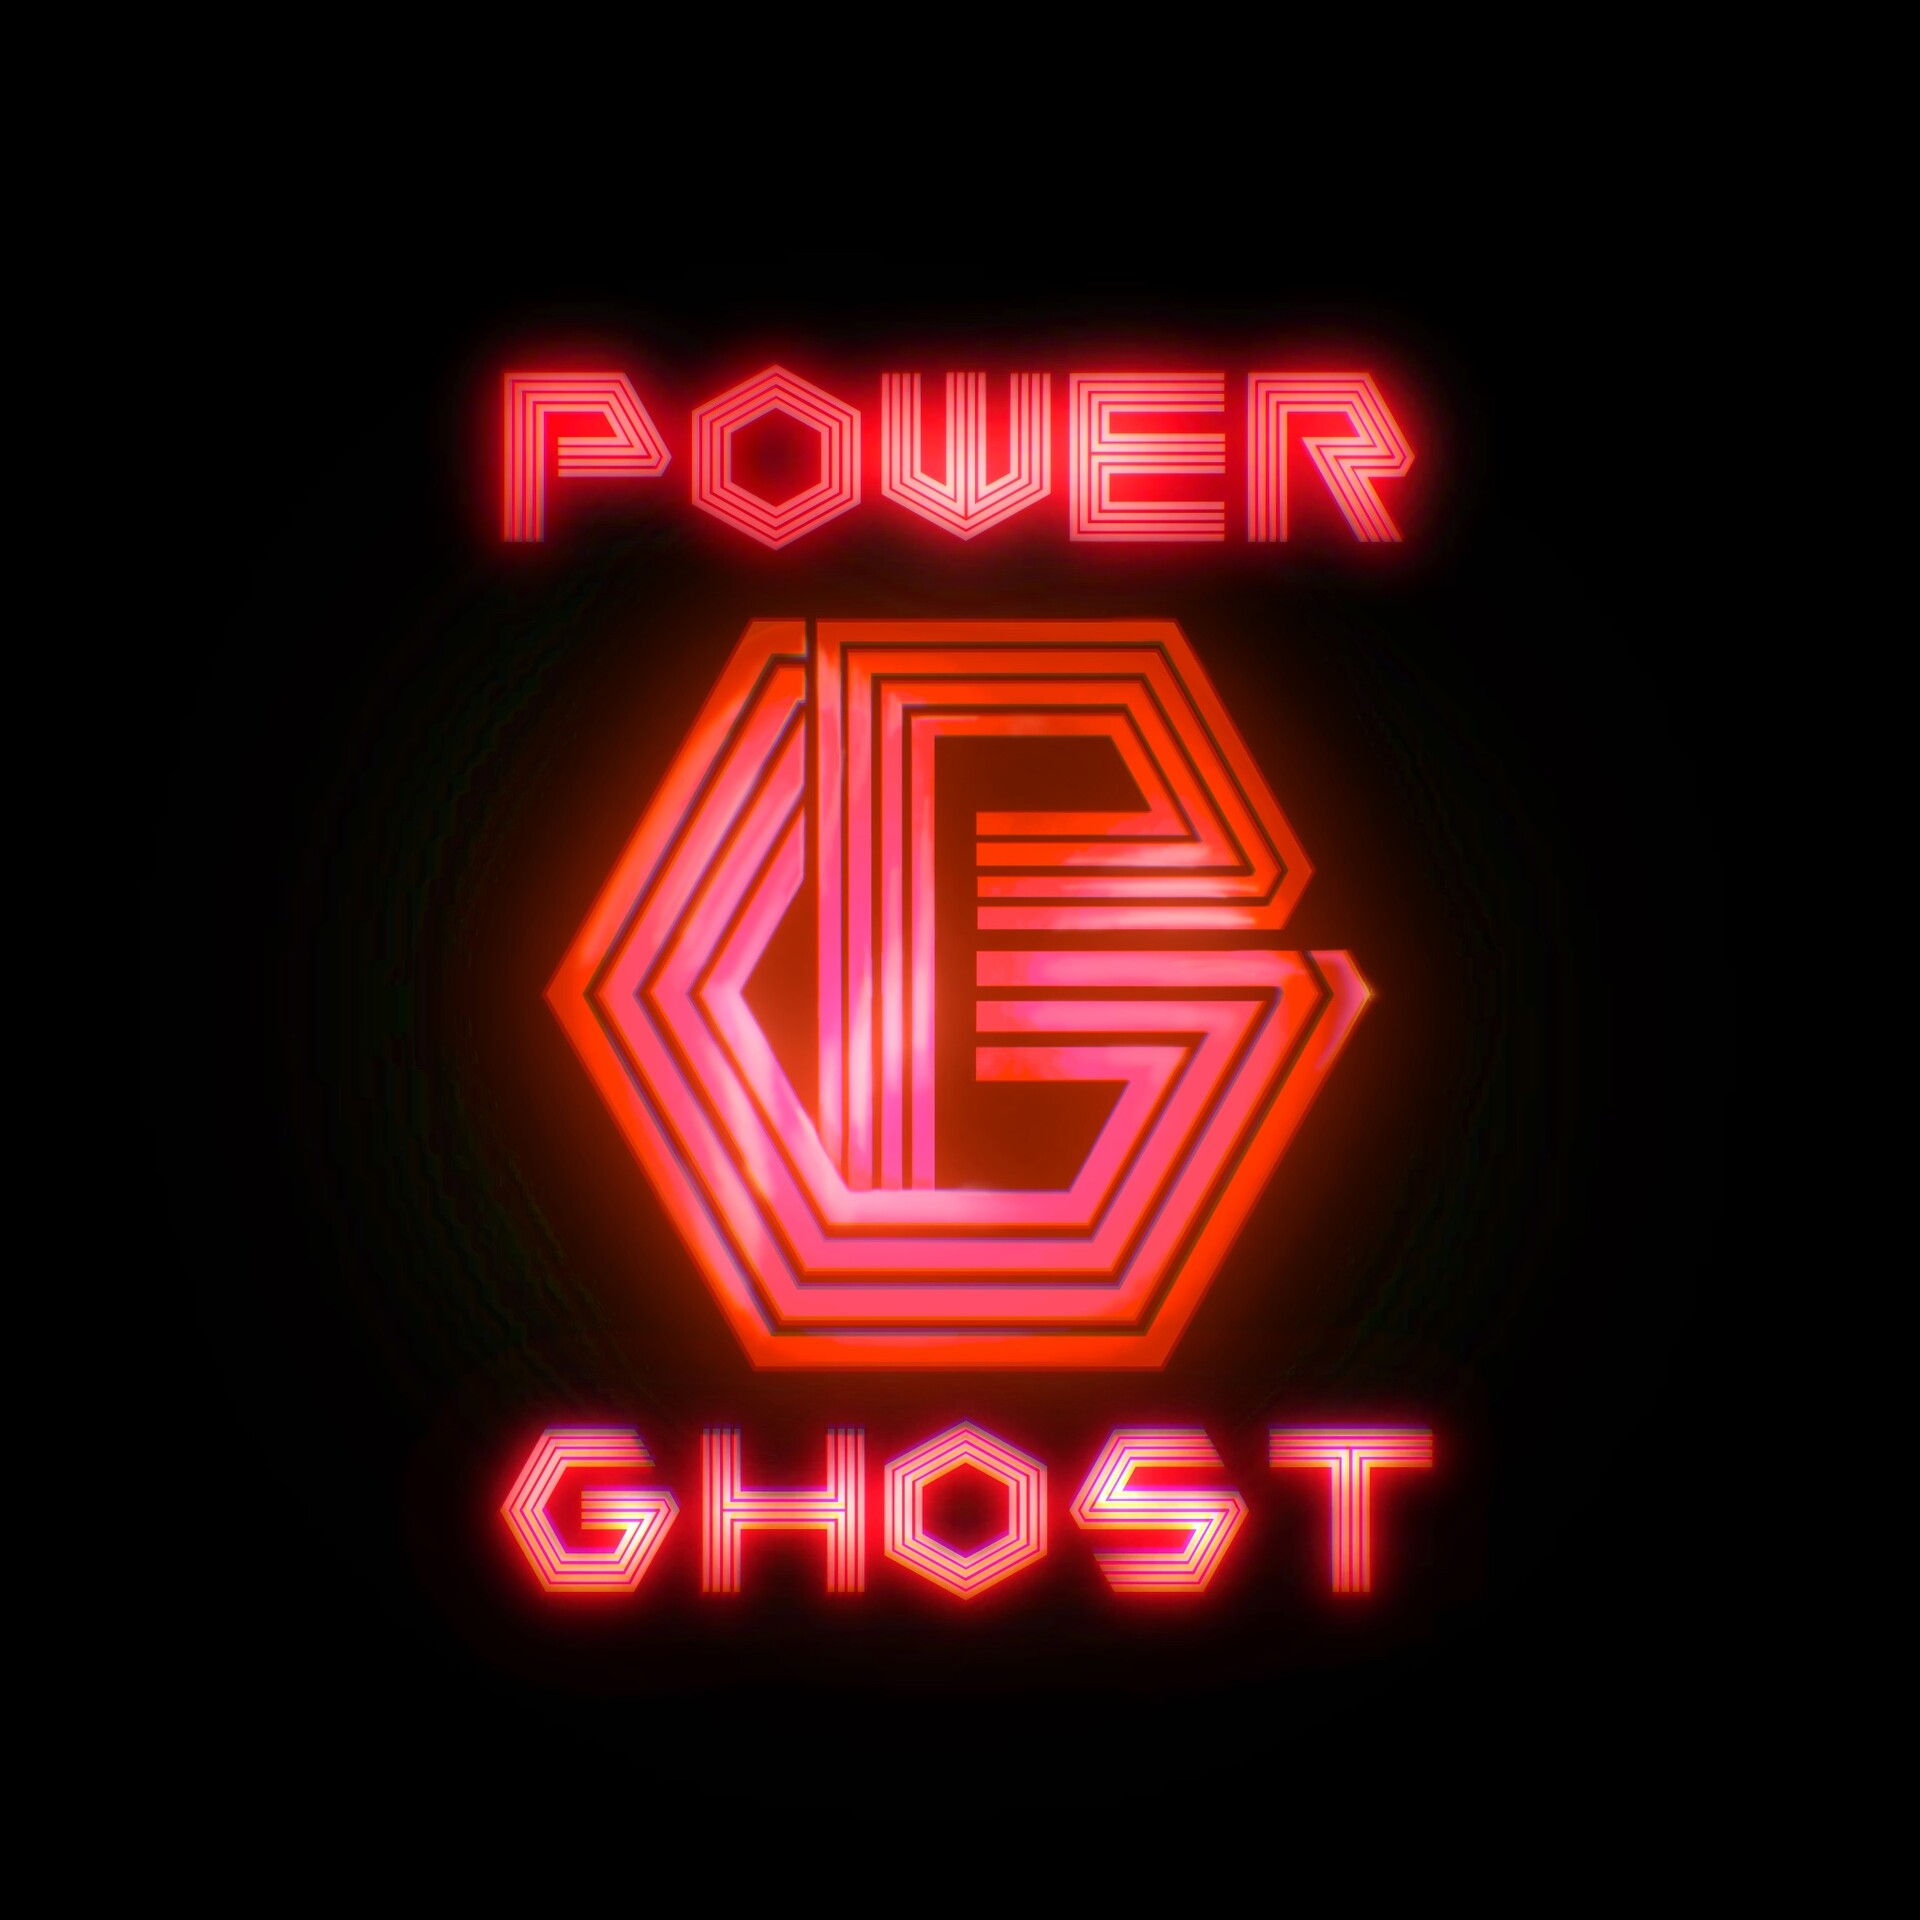 Ghost - Logo re-design by Martin Milev on Dribbble